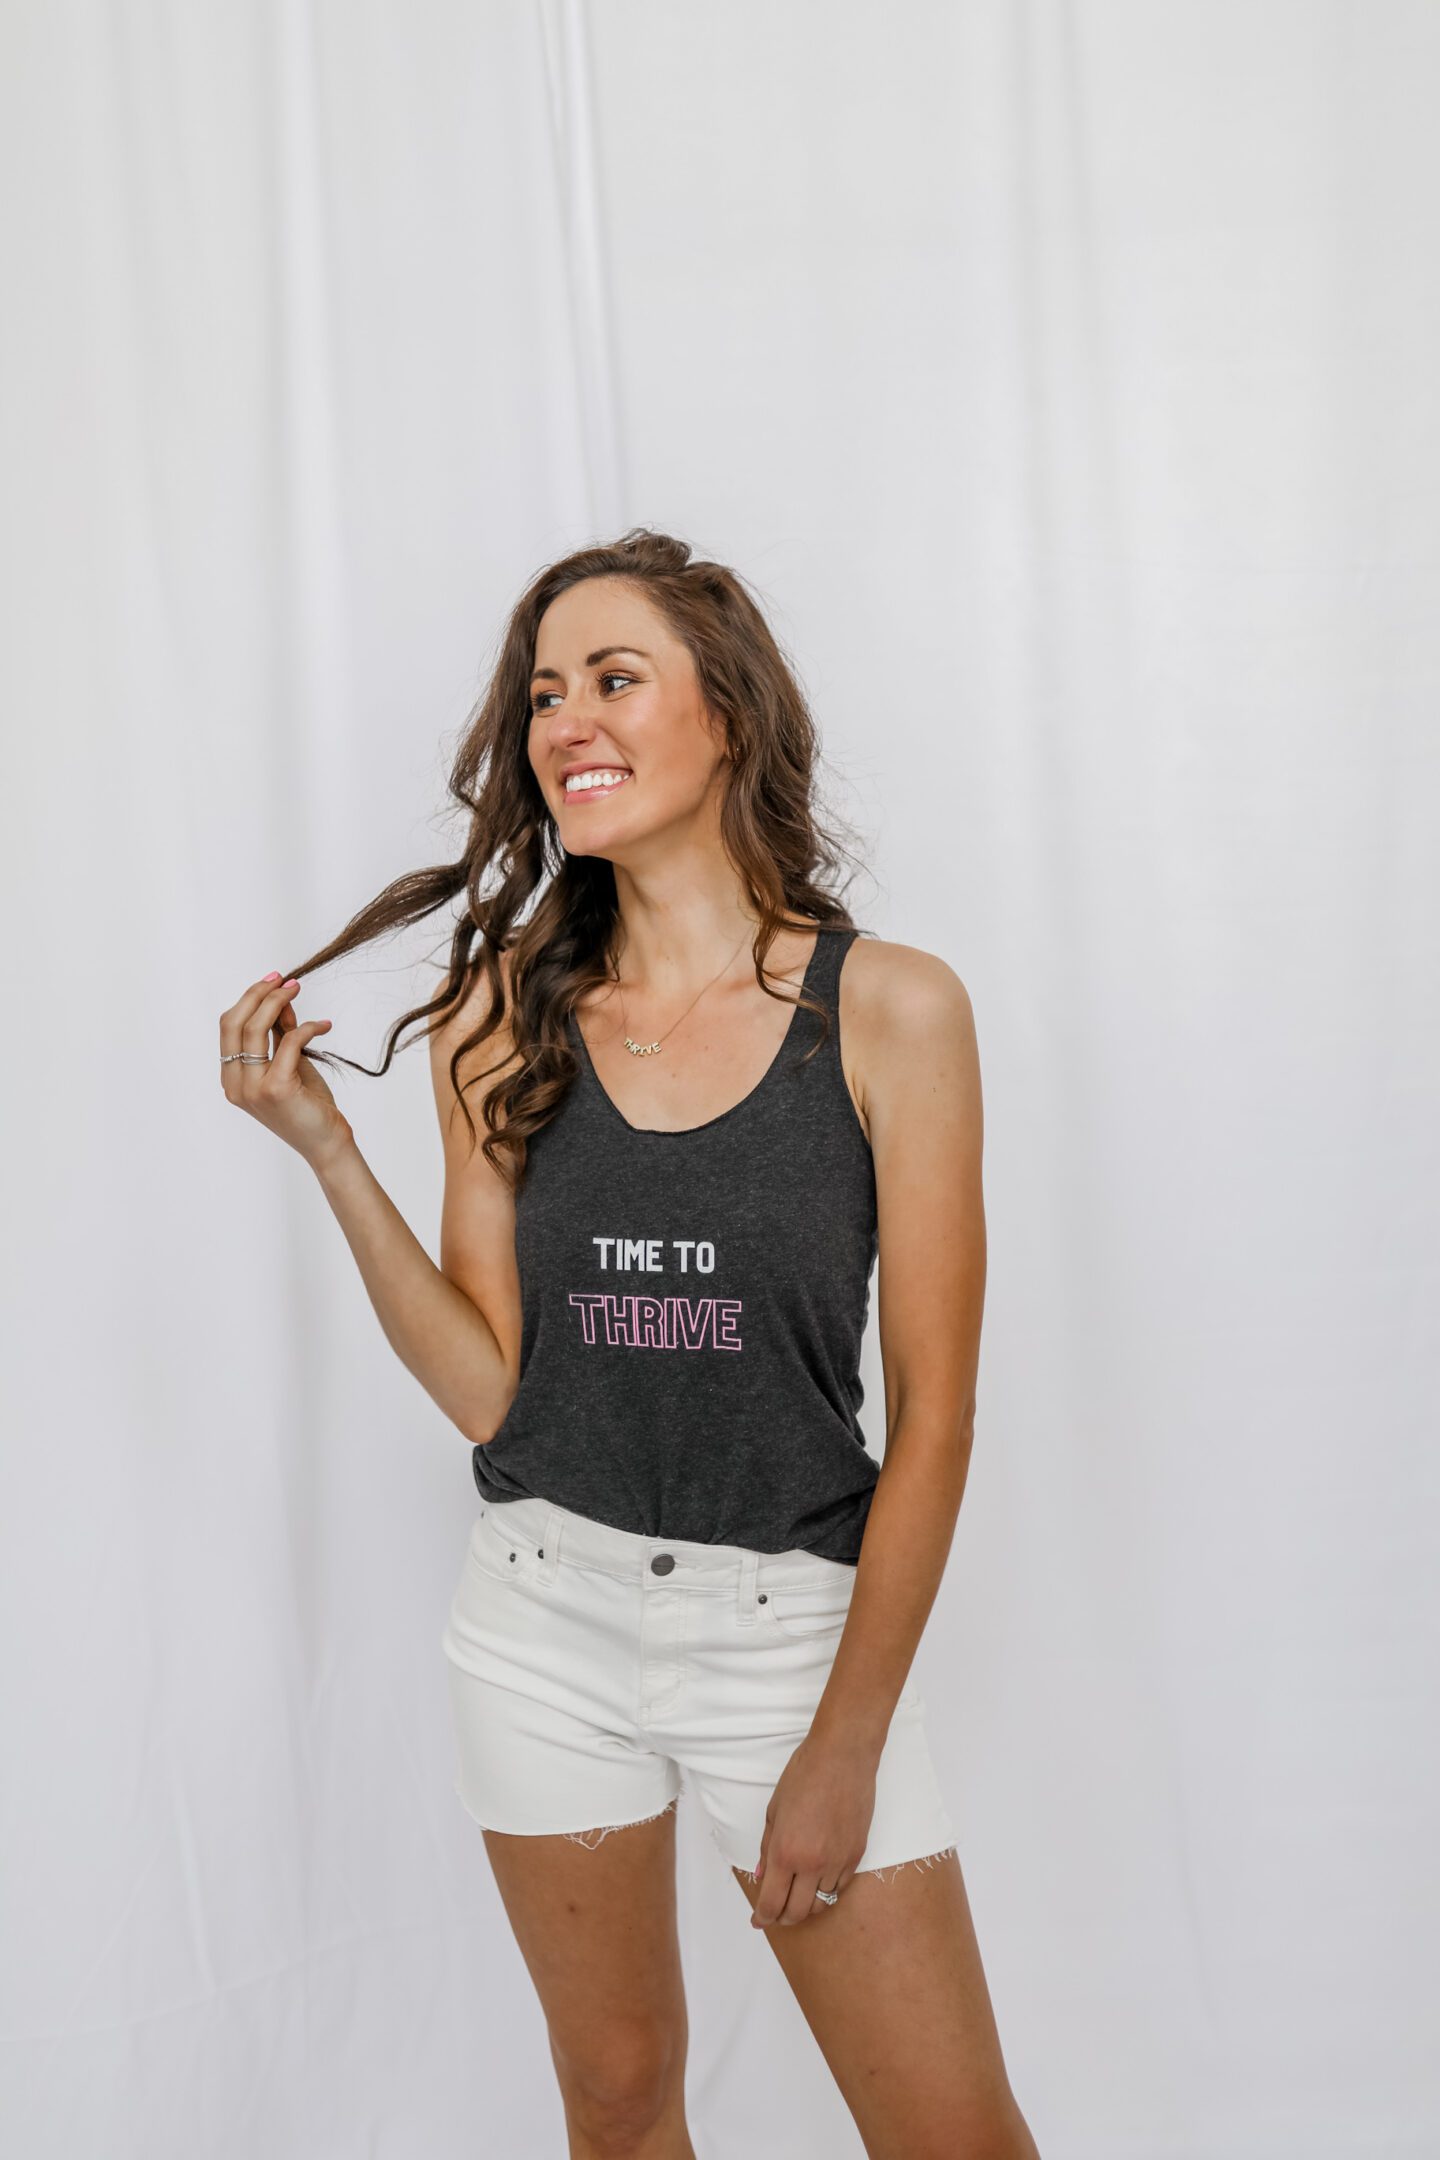 TIME TO THRIVE Racerback Tank - the THRIVING Collection on Coming Up Roses